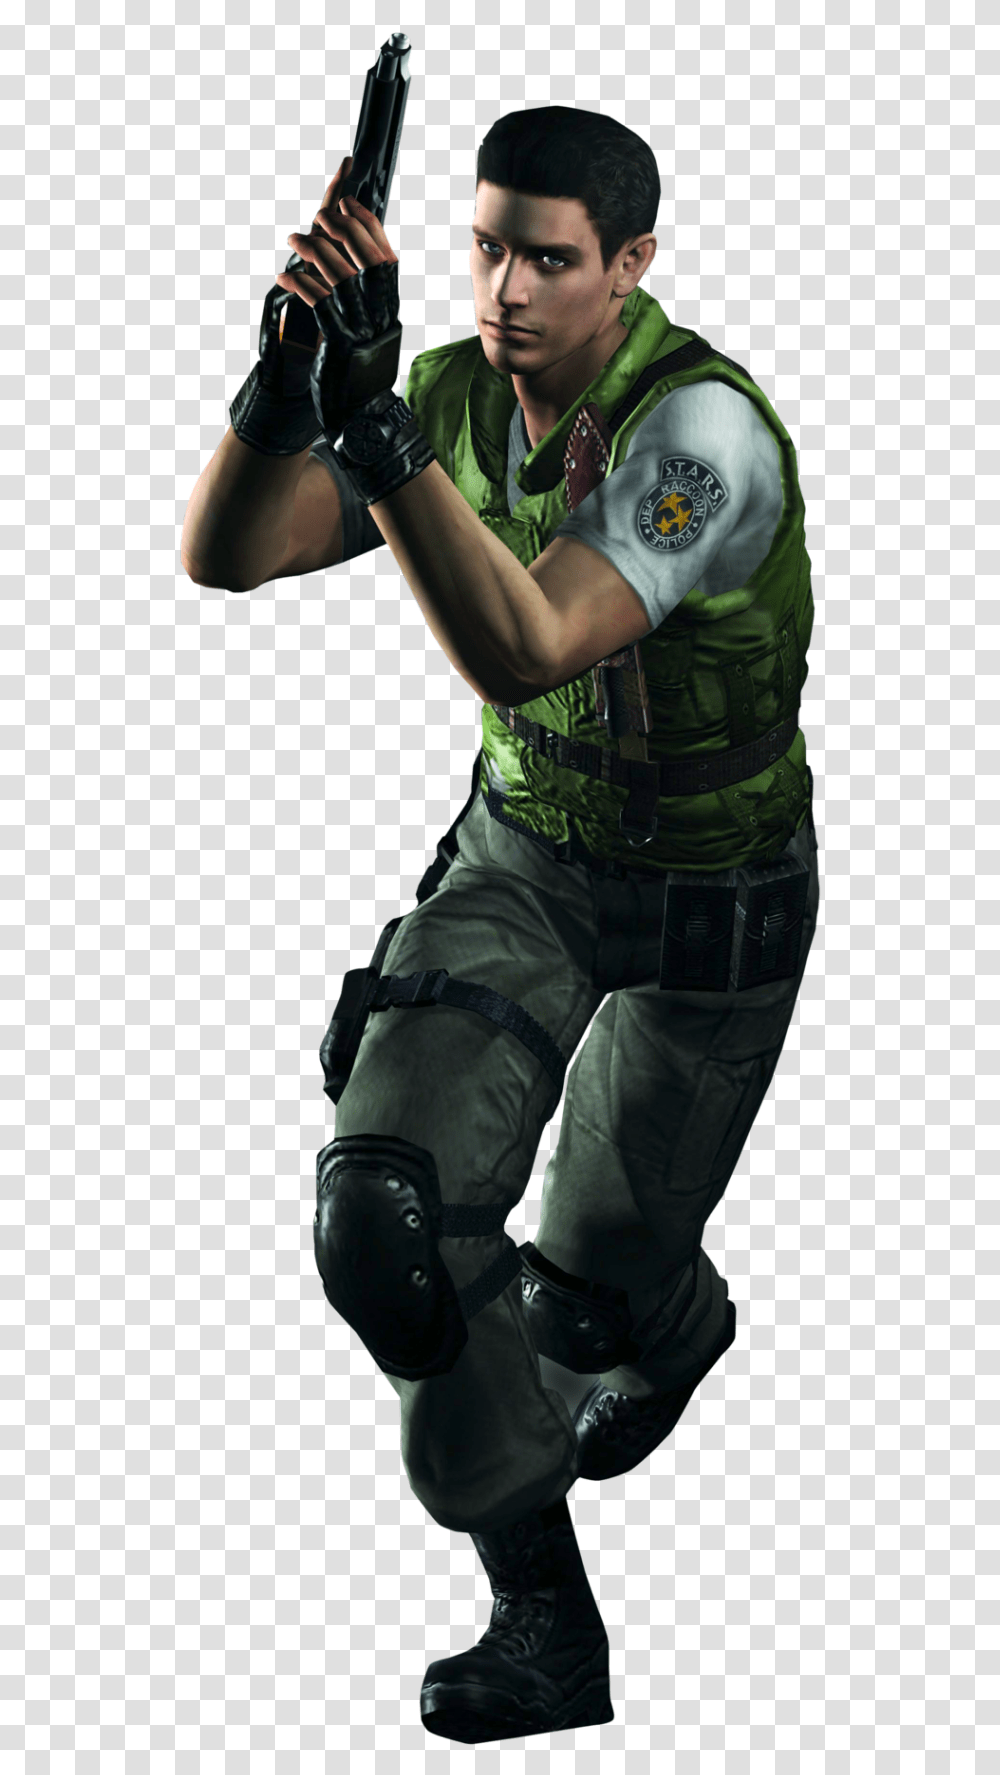 Chris Redfield Hd Remaster Cu Resident Evil Remake Chris Redfield, Person, Ninja, Weapon, Counter Strike Transparent Png